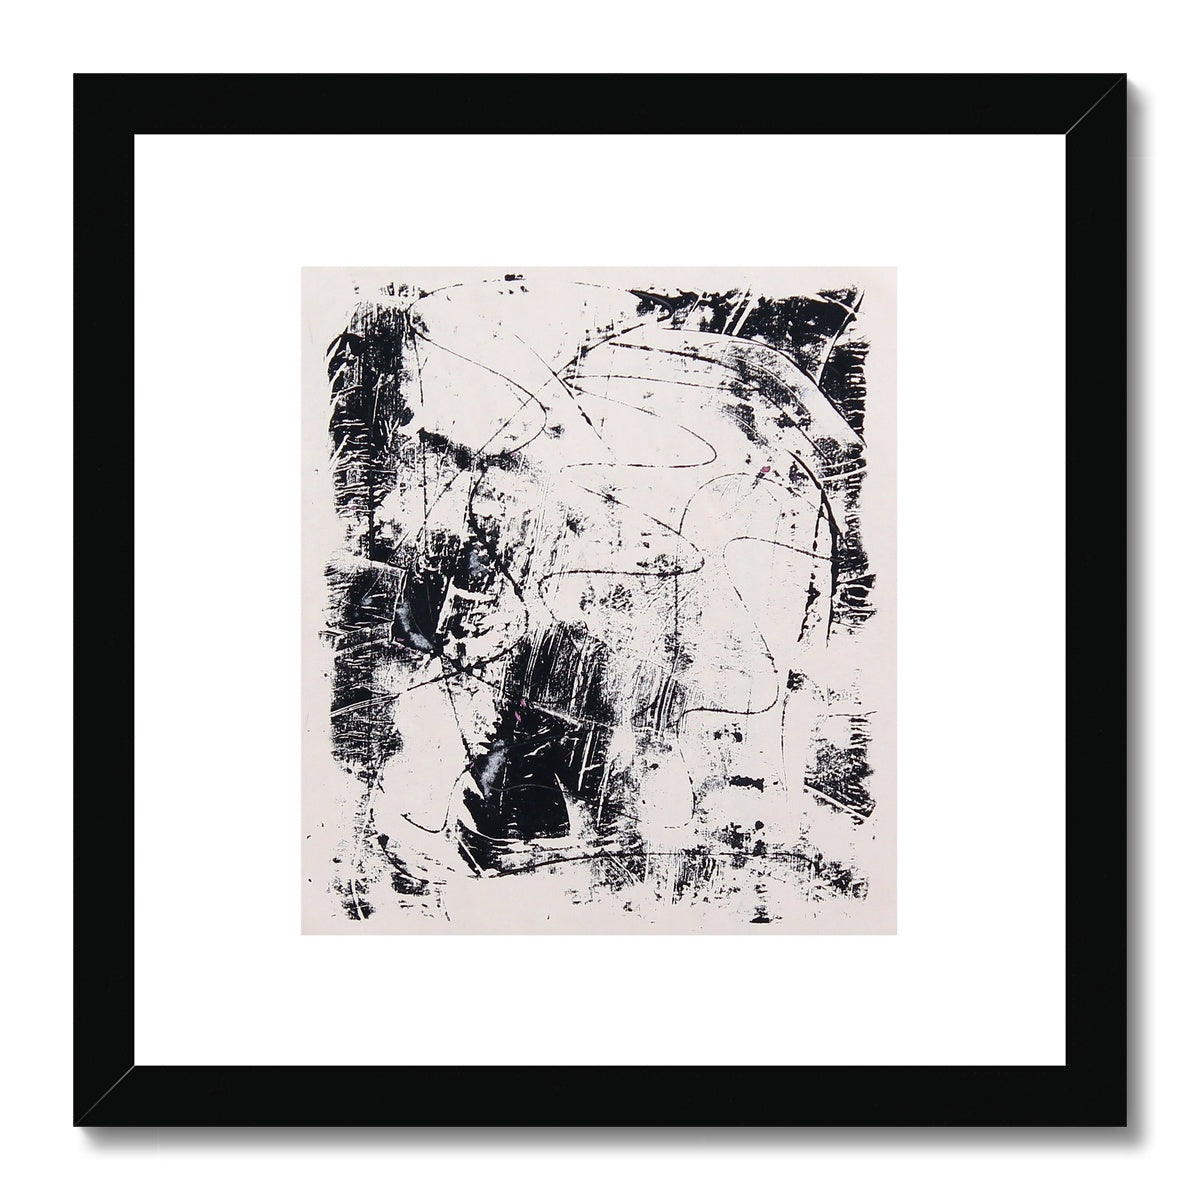 Inhale and exhale 11, Framed & Mounted Print